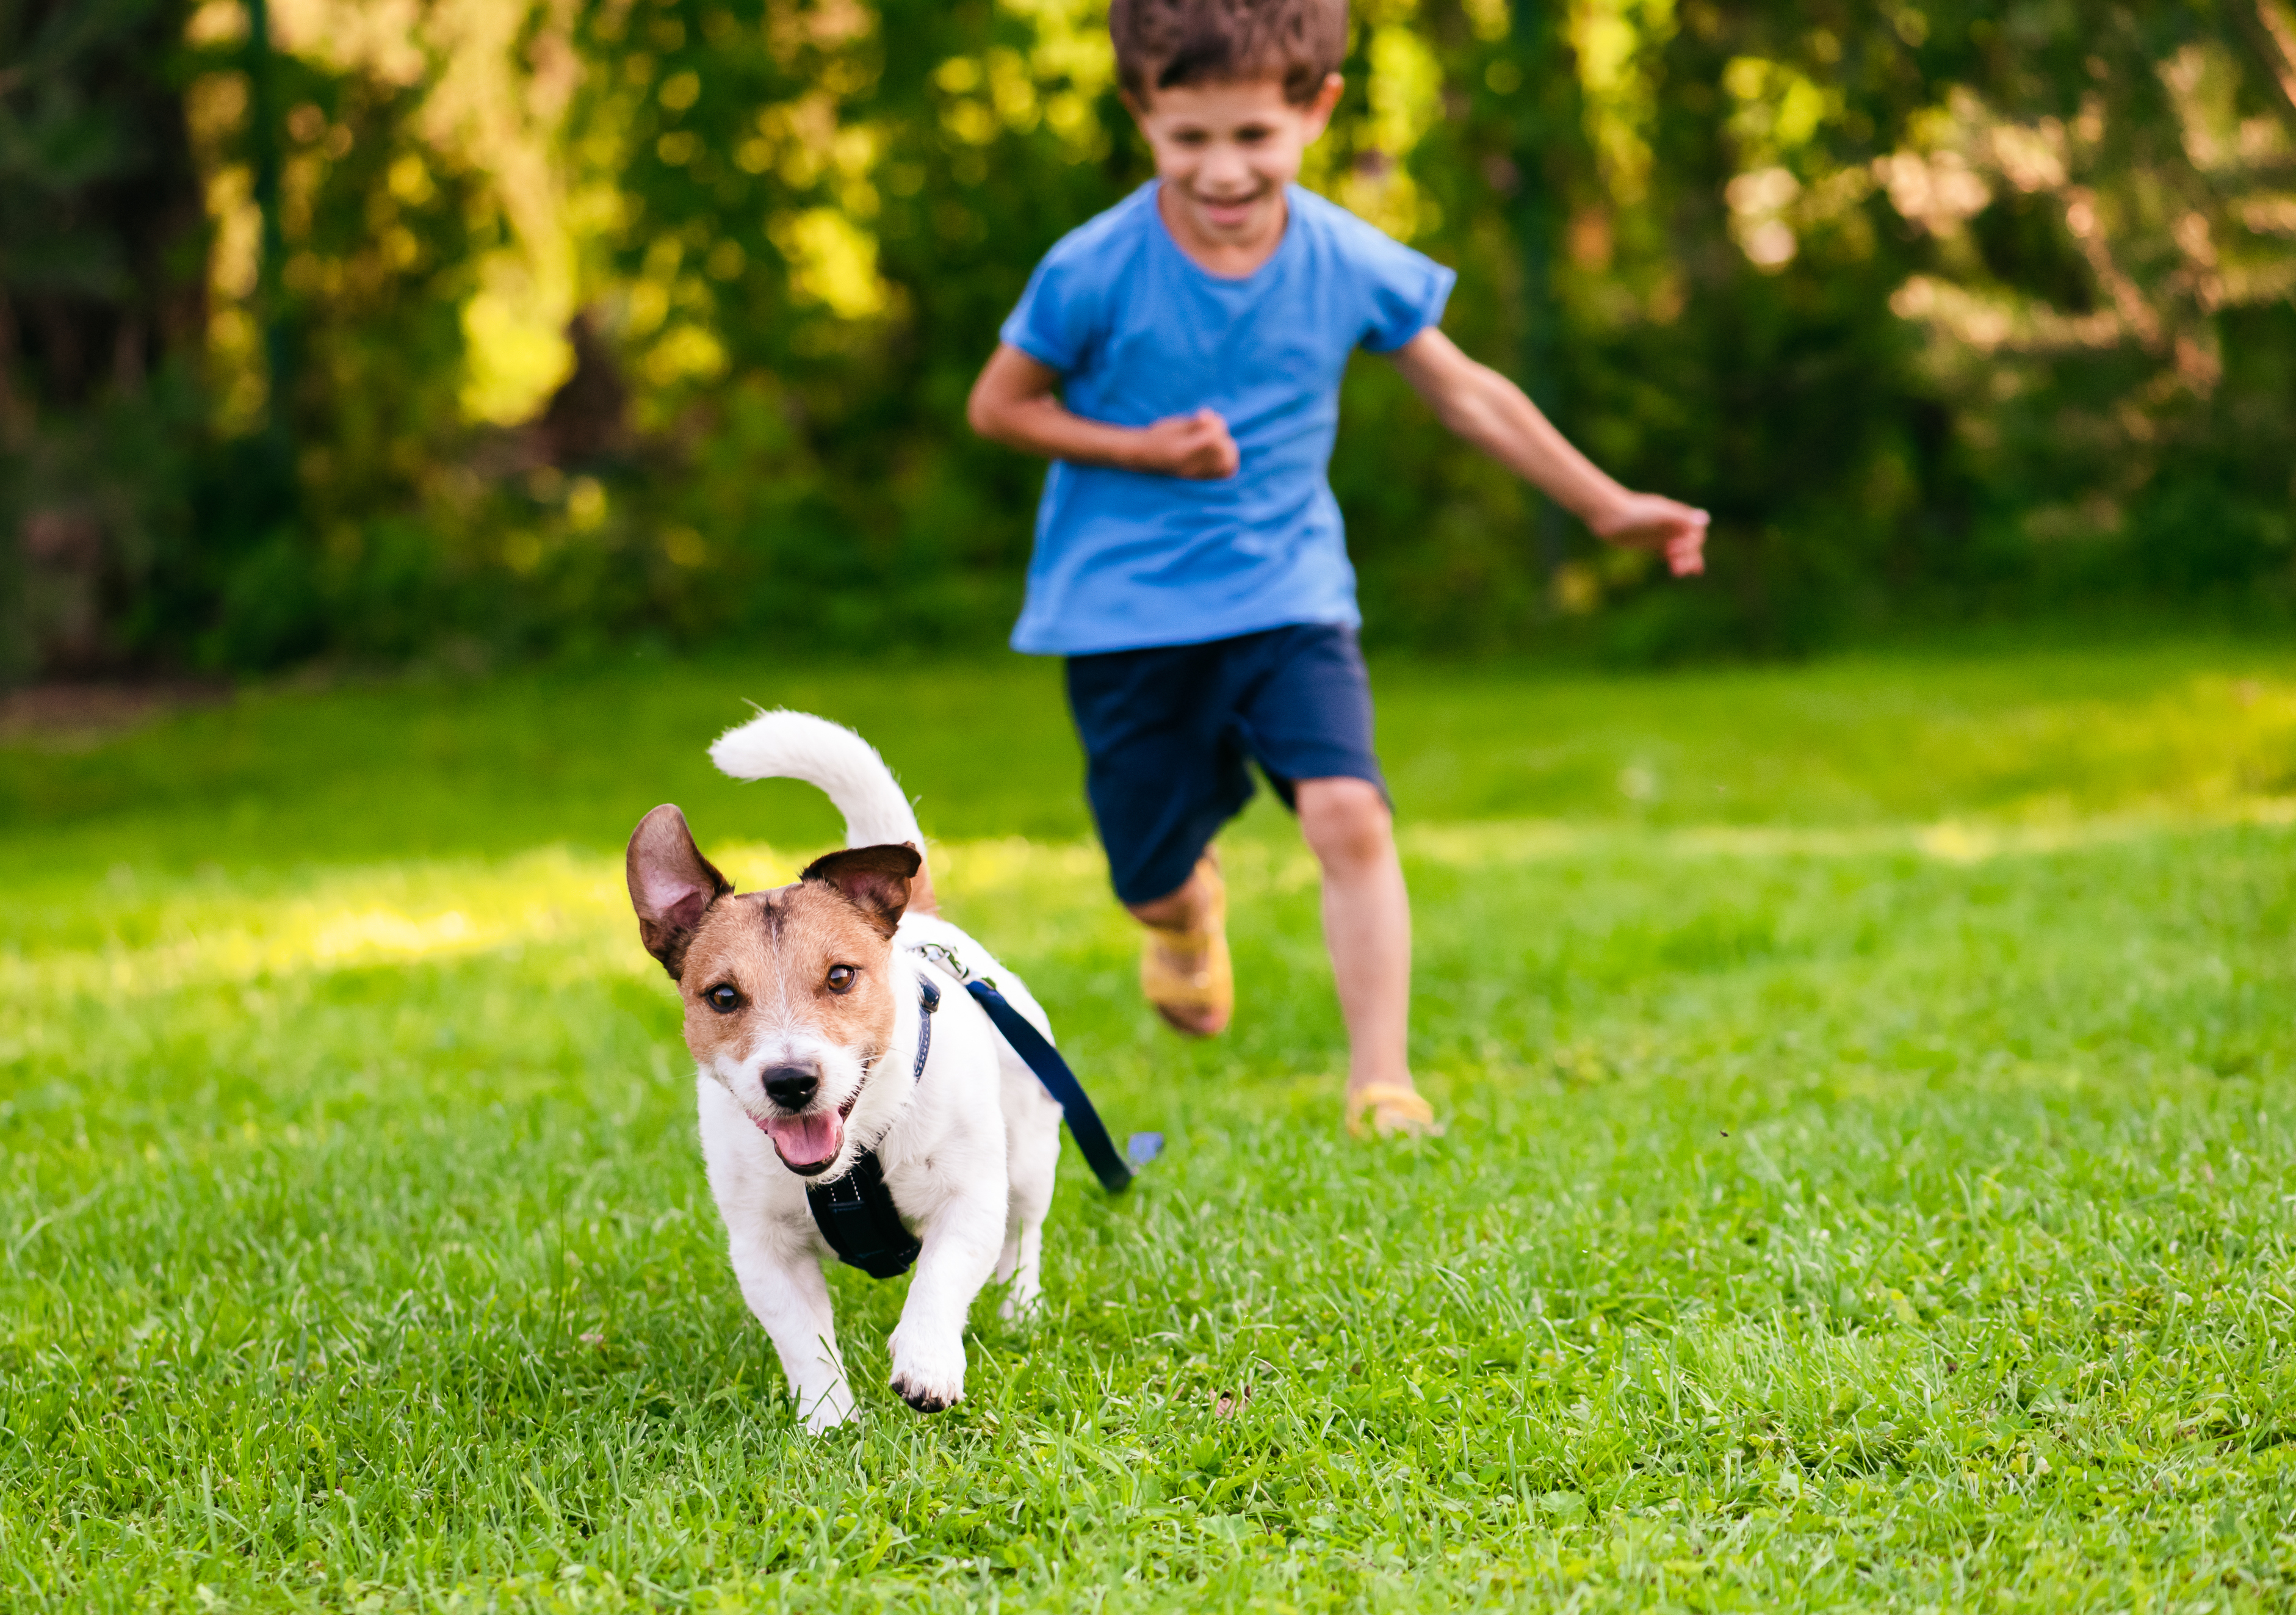 A boy chasing his Jack Russell Terrier dog